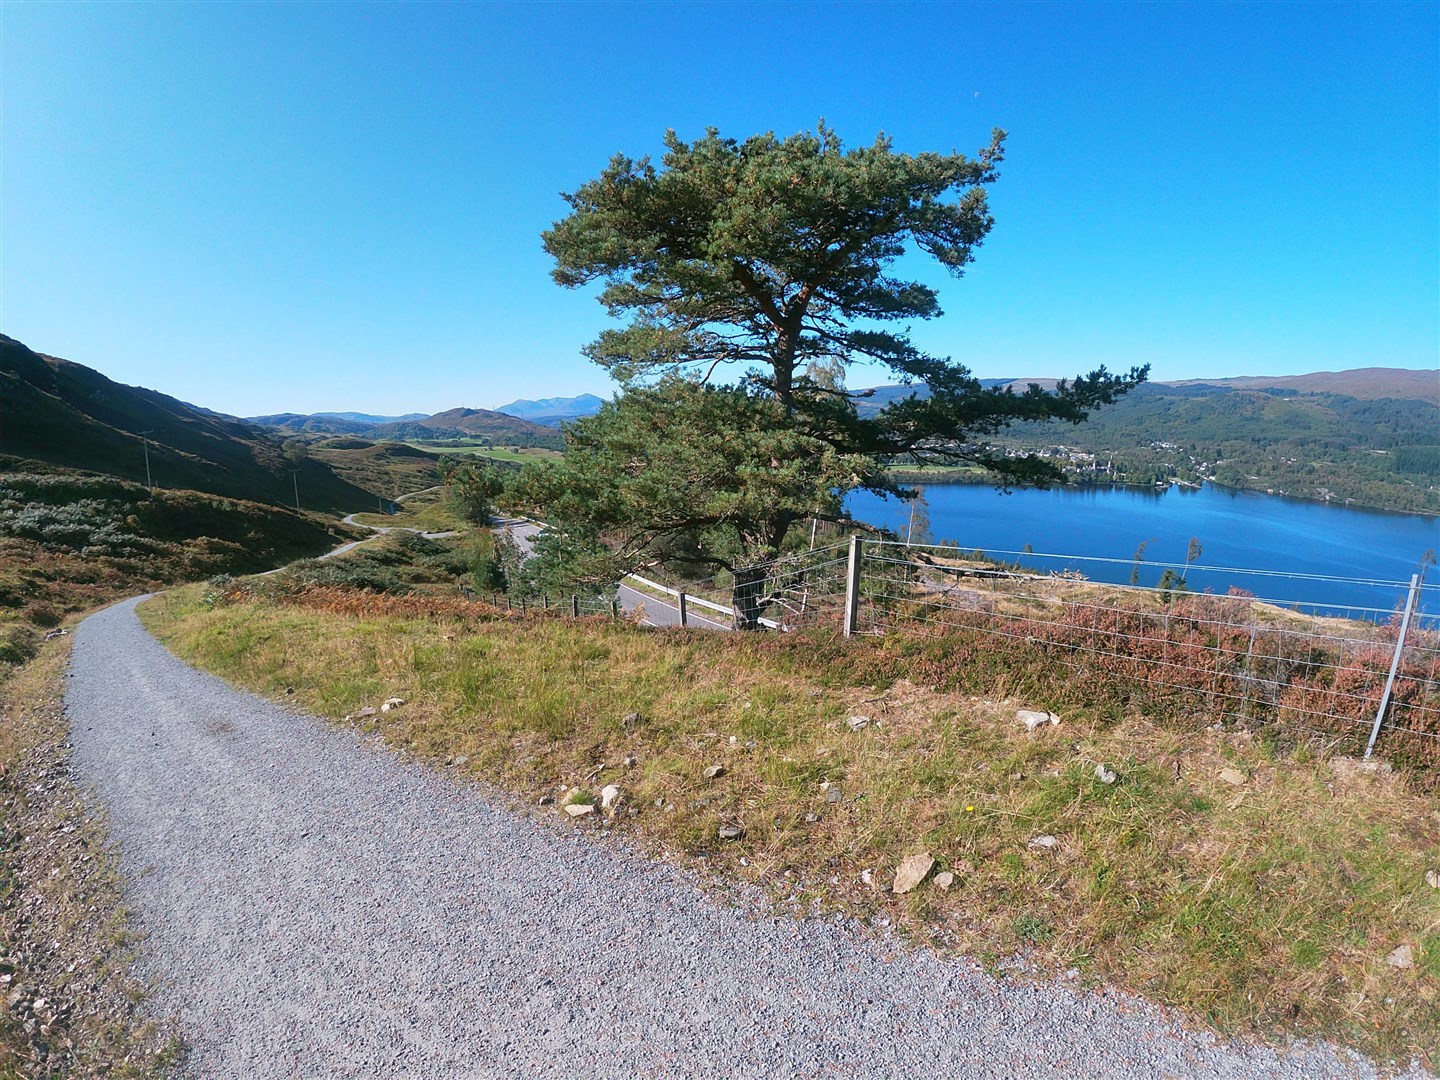 The Loch Ness 360 follows off-road trails around the loch.